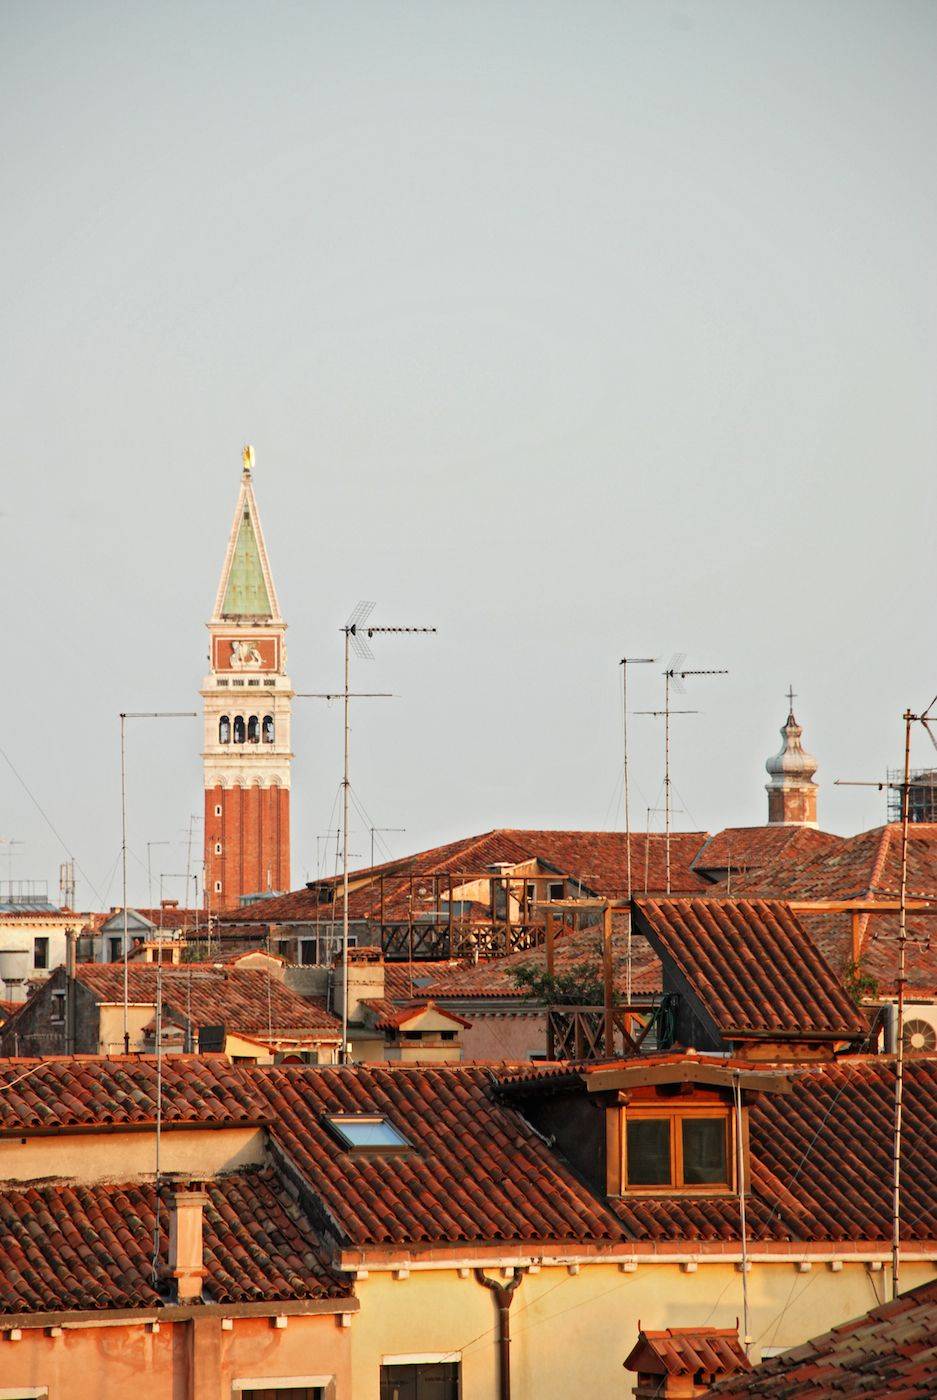 the view from the attic bedroom on the roof-tops of the historical center